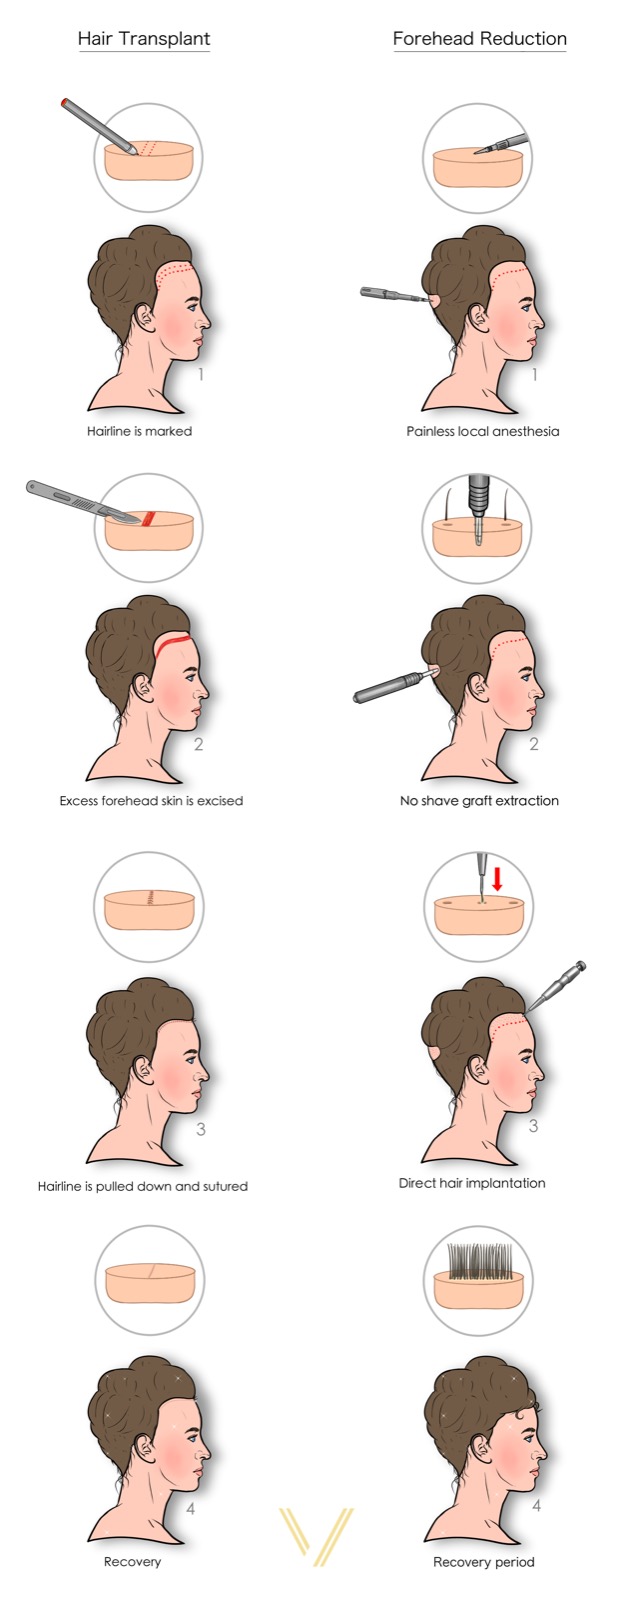 hair transplant vs forehead reduction for hairline lowering operation